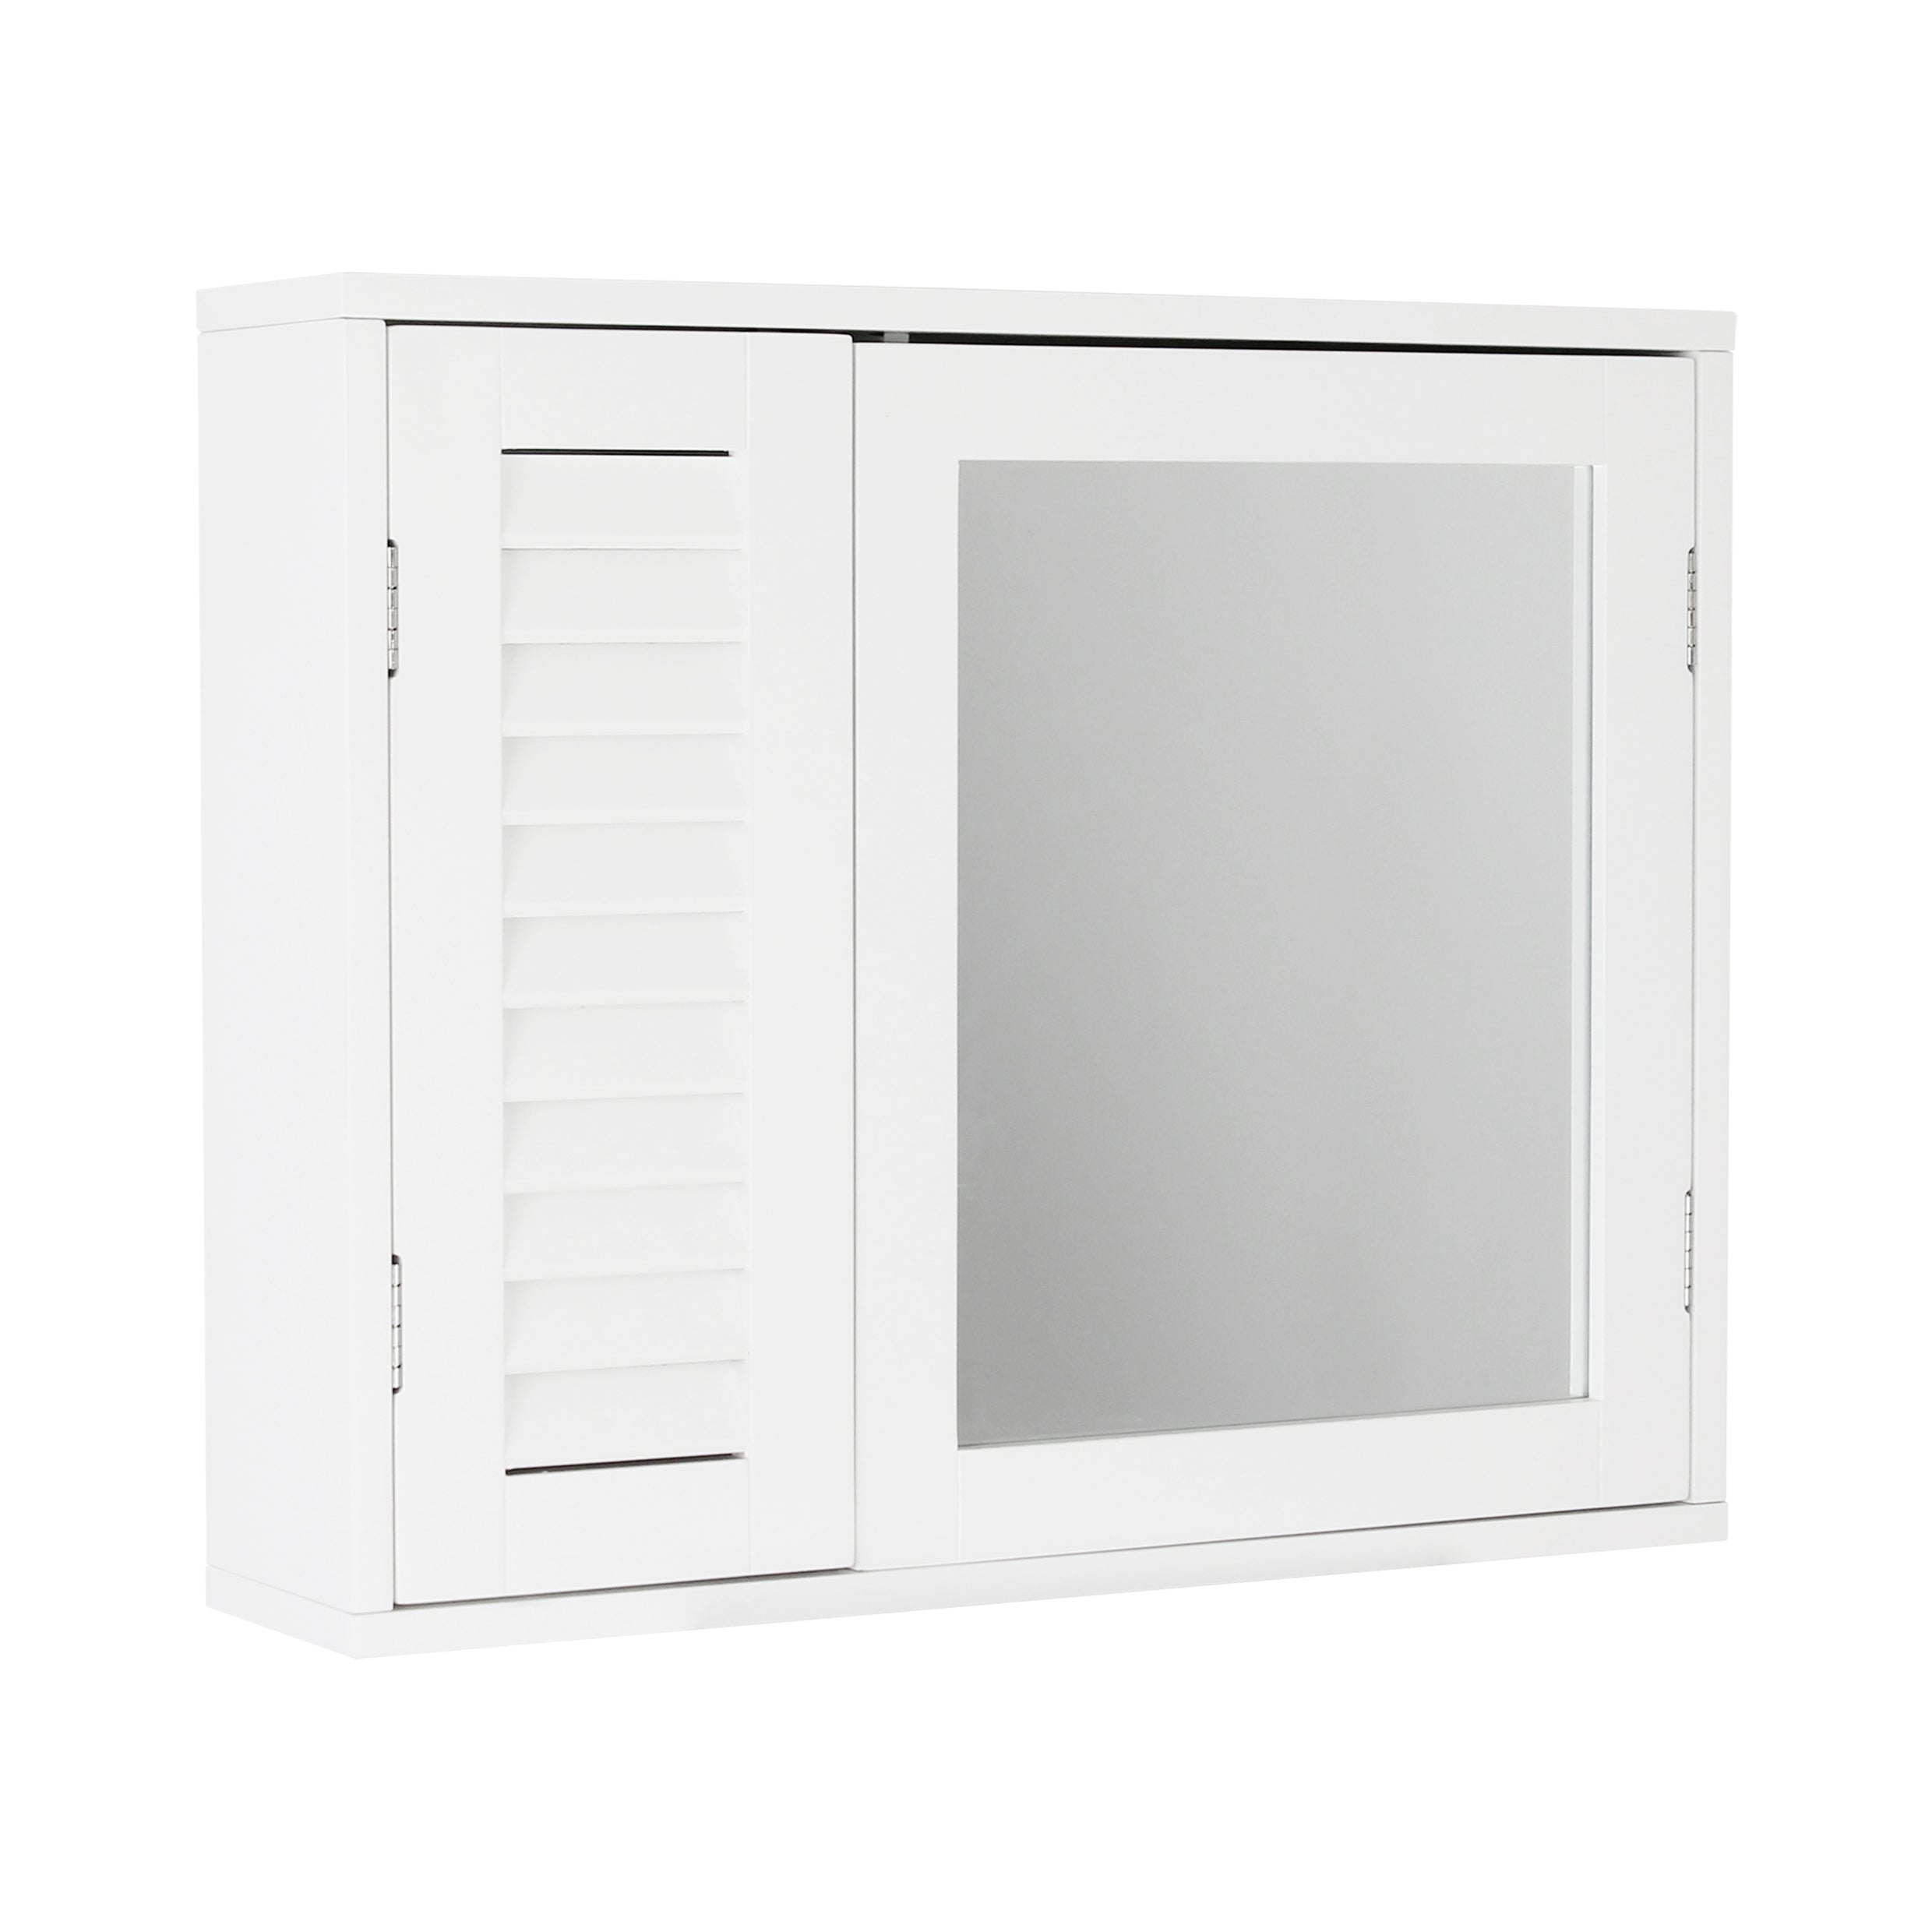 Photos - Display Cabinet / Bookcase Tuscany Leather White Tuscany Double-Door Cabinet White 